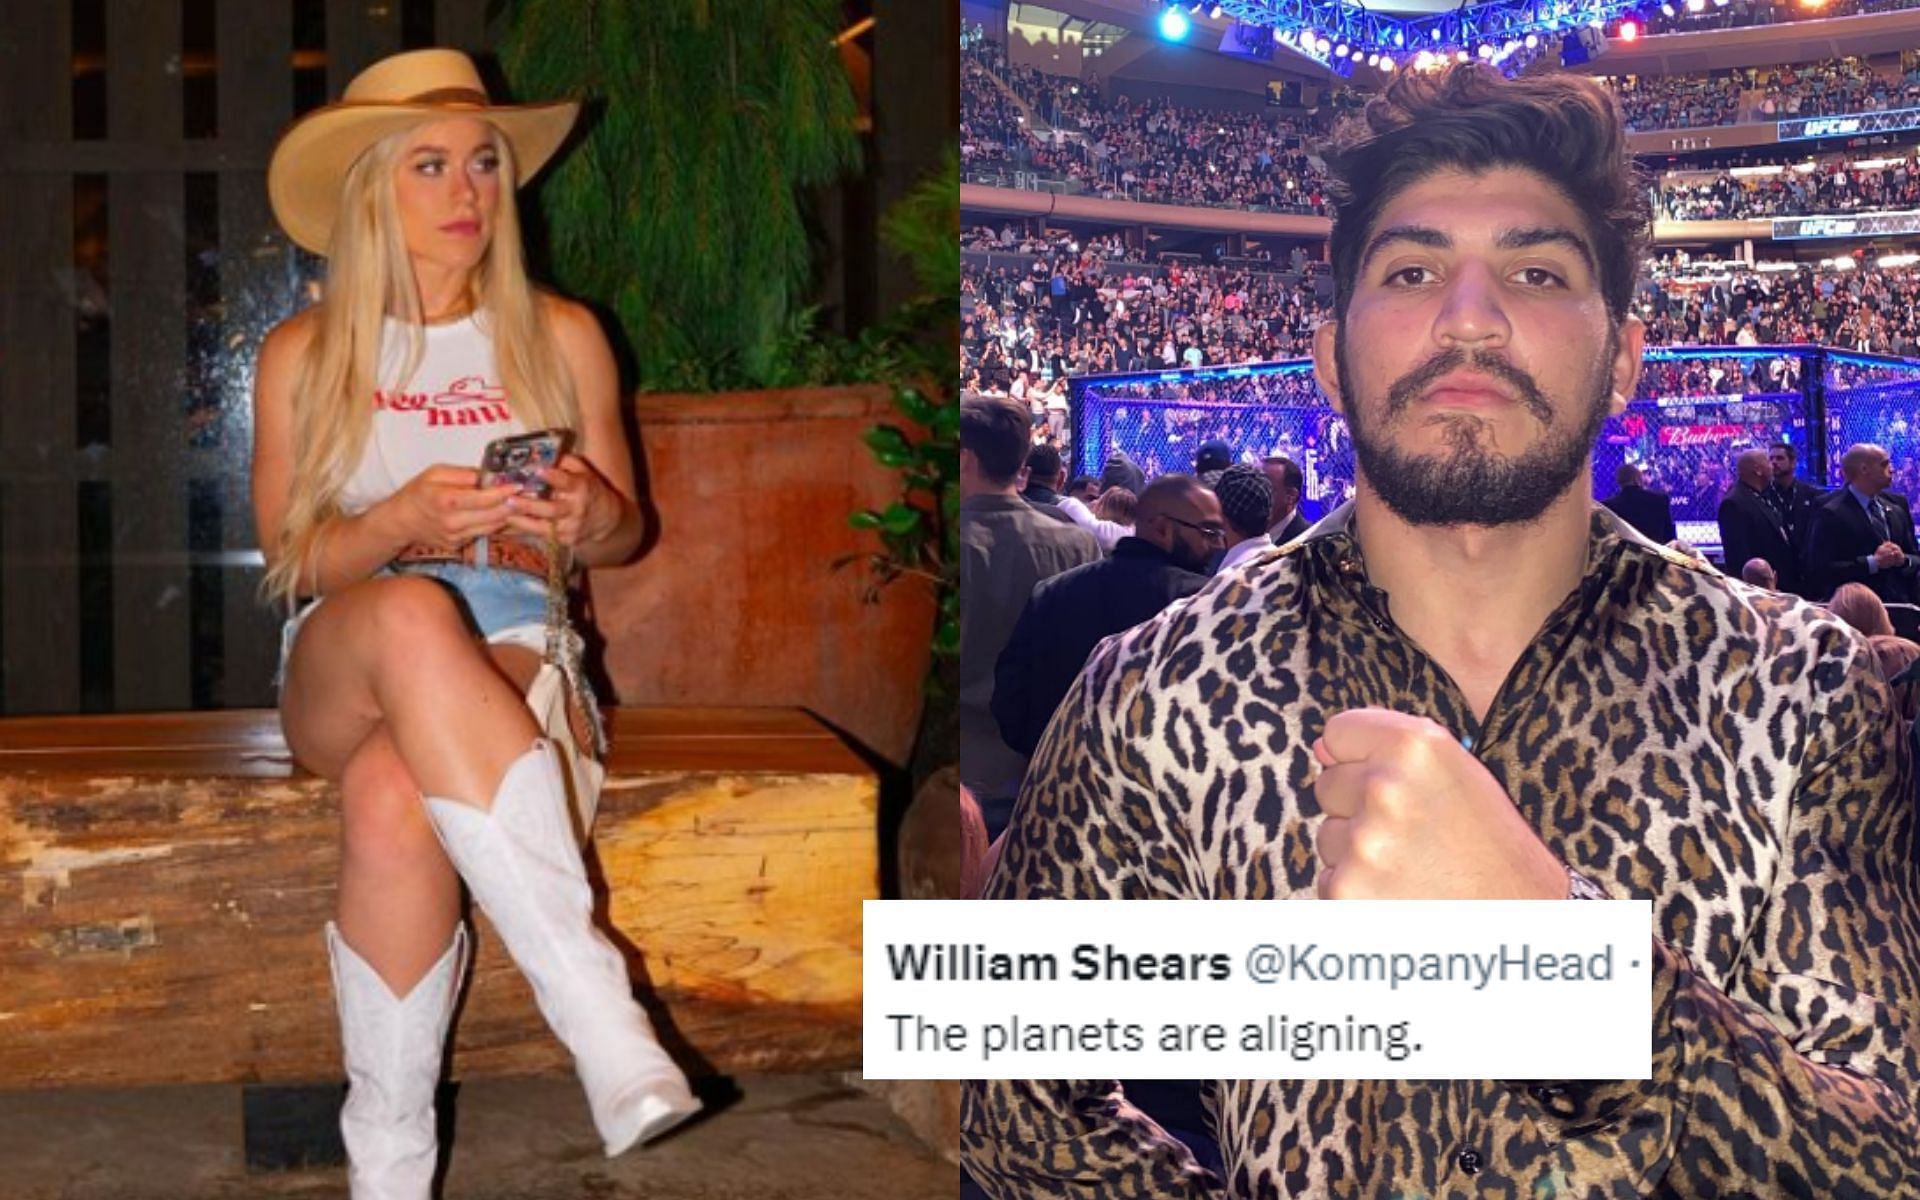 Elle Brooke and Dillon Danis [Image credits: @dillondanis and @thedumbledong on Instagram] 